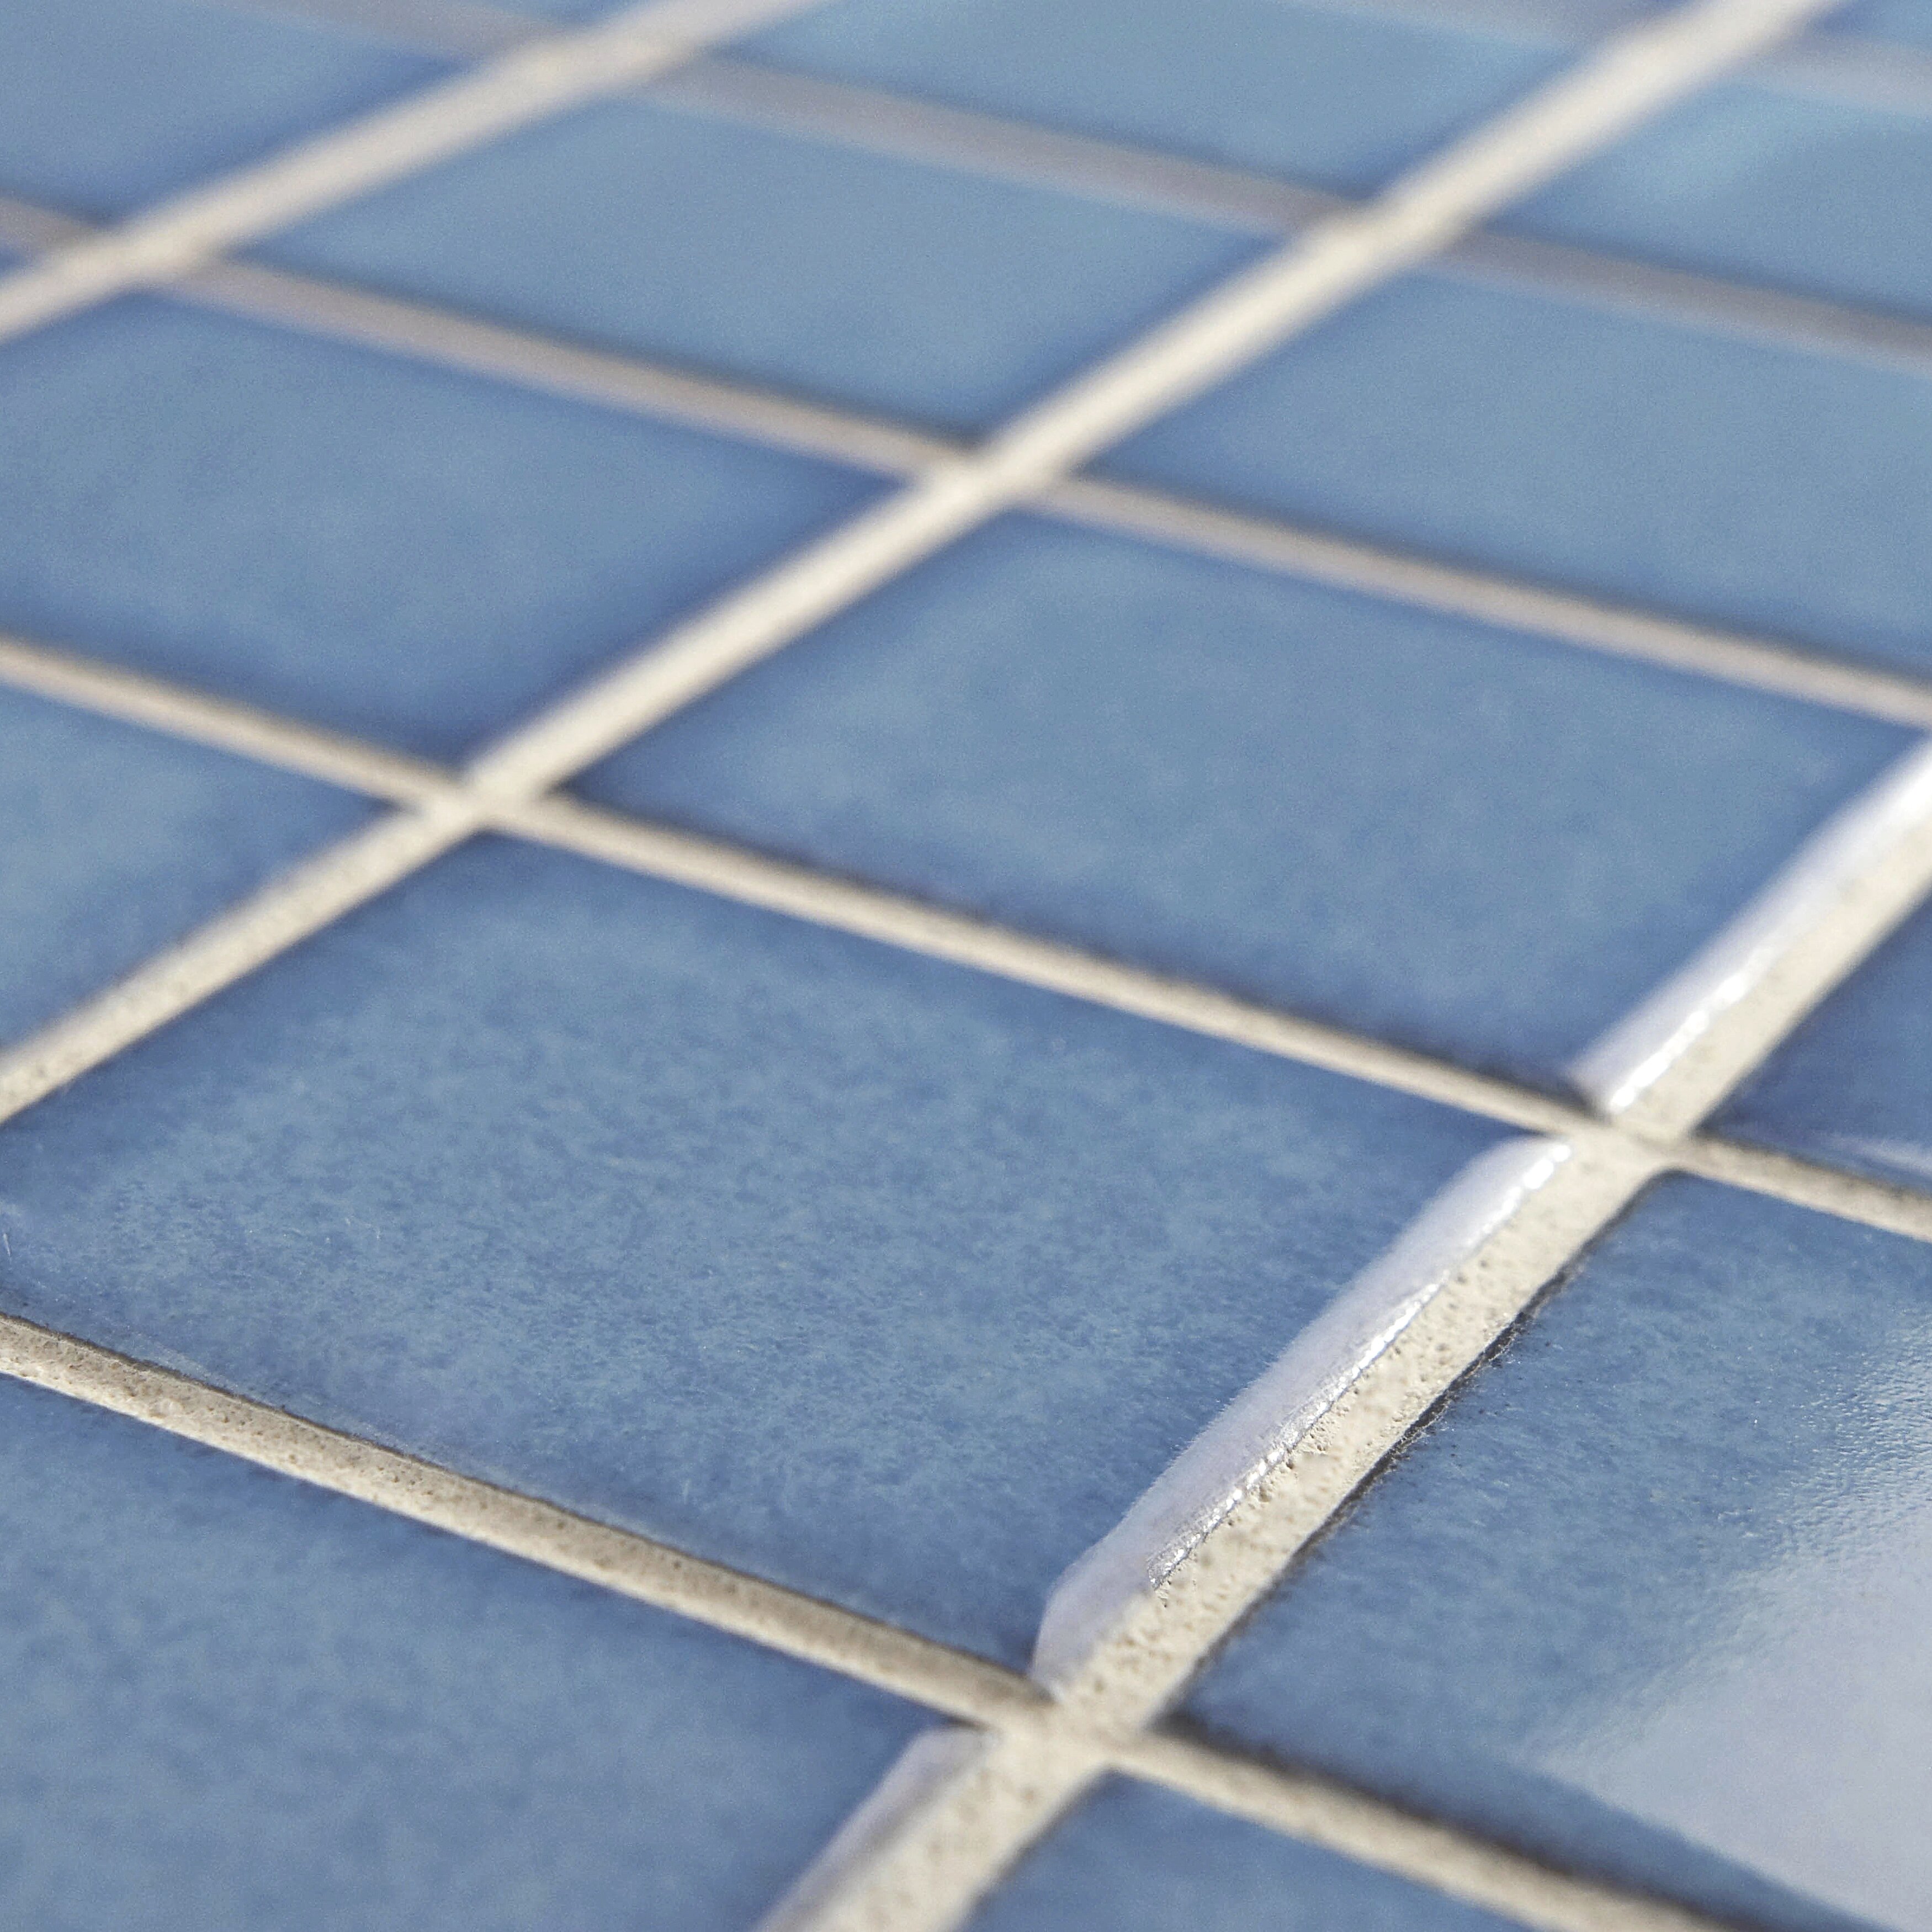 Elitetile Pool 2 X 2 Porcelain Mosaic Tile In Cerulean And Reviews